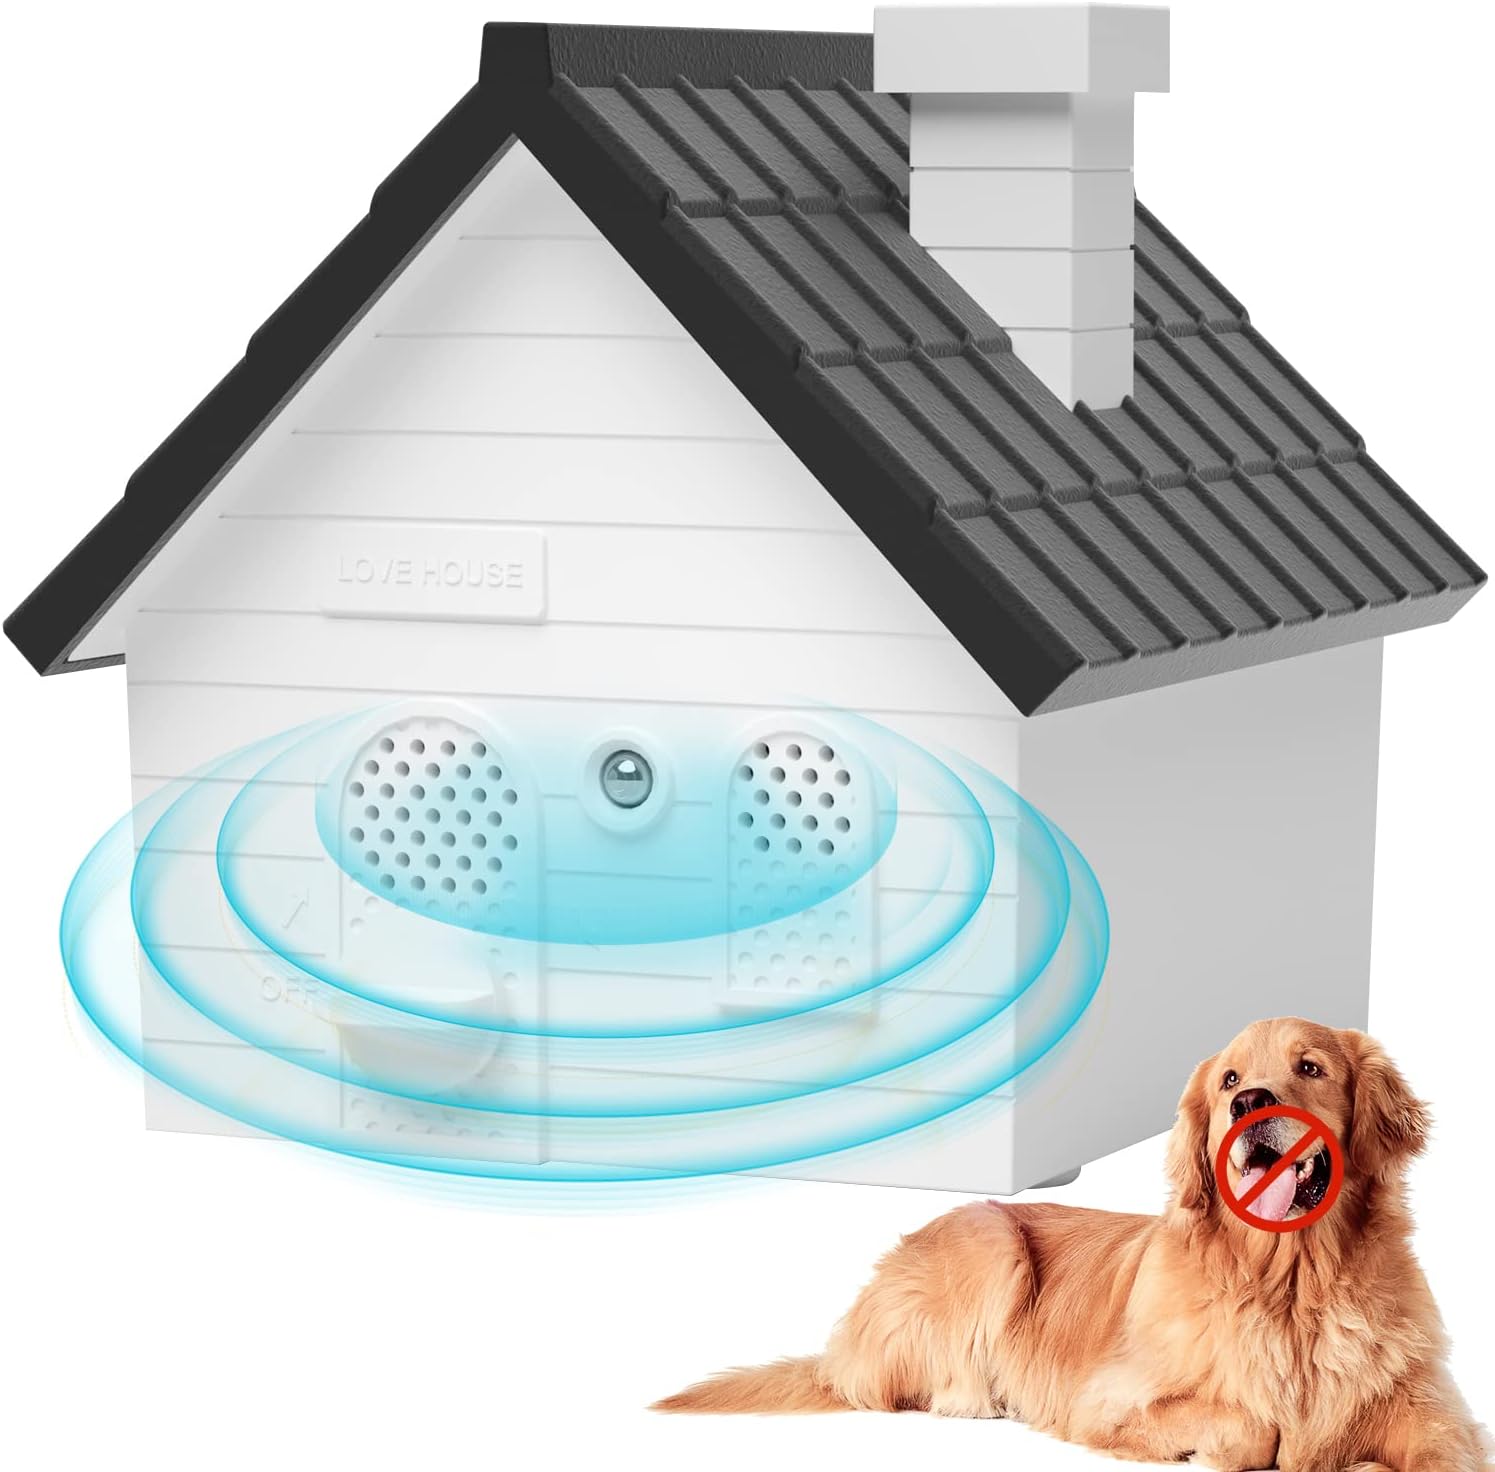 EasyULT Anti Barking Device Outdoor and Indoor